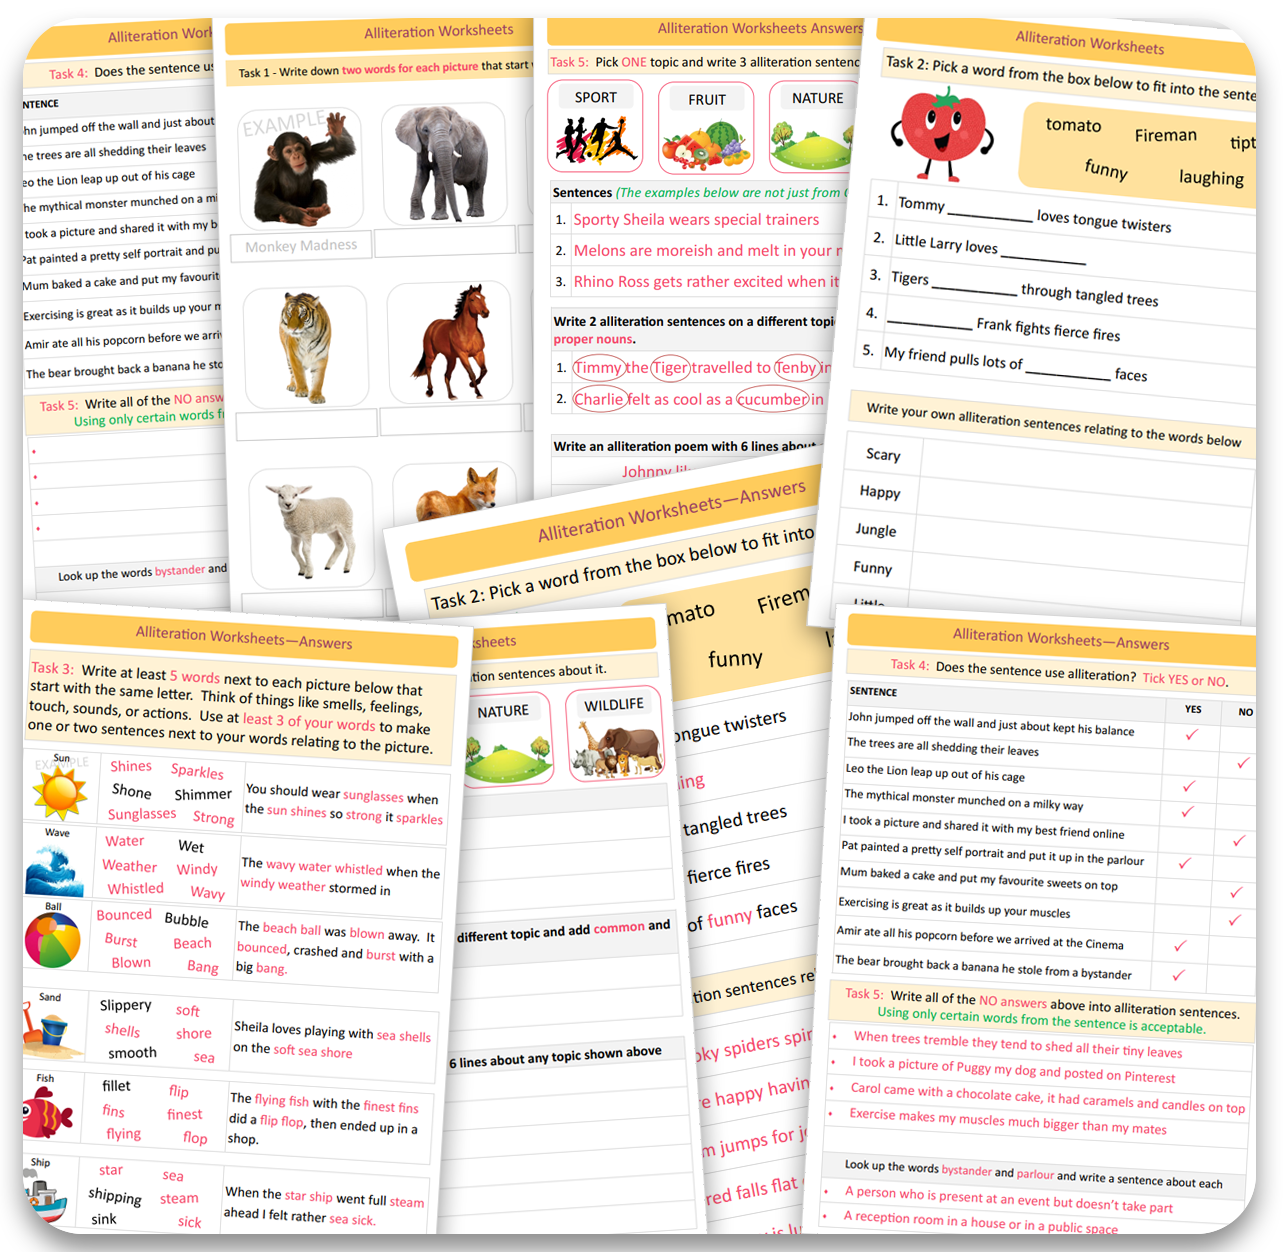 healthy eating worksheets to promote well-being. Great fun activities.